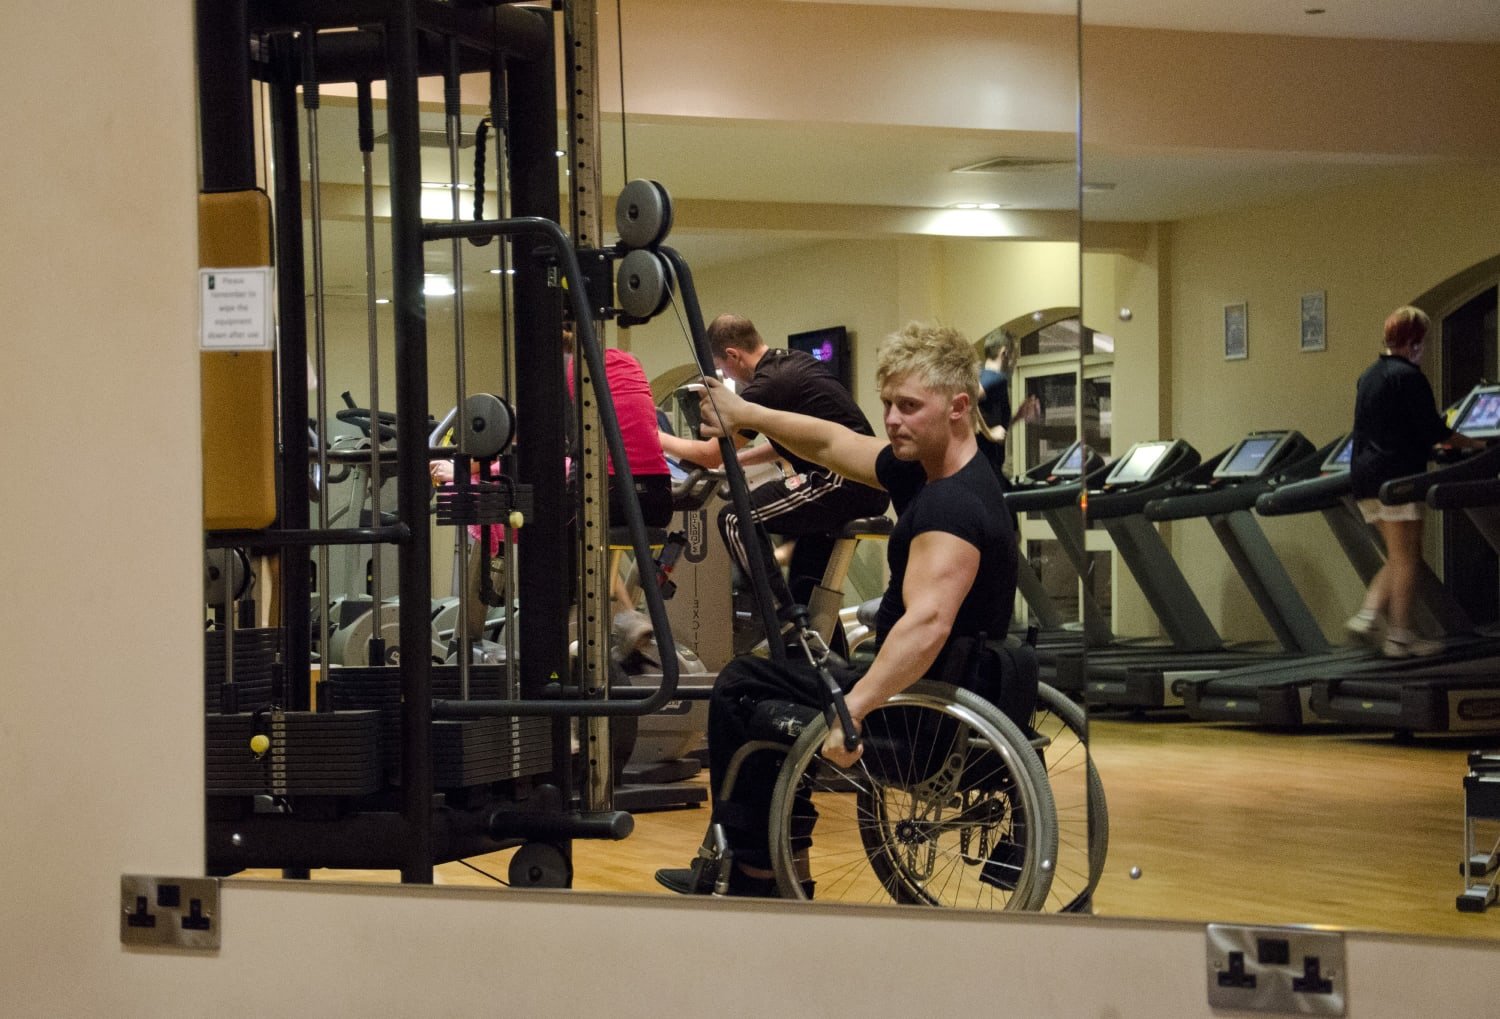 Charlie in his wheelchair, working out in the gym